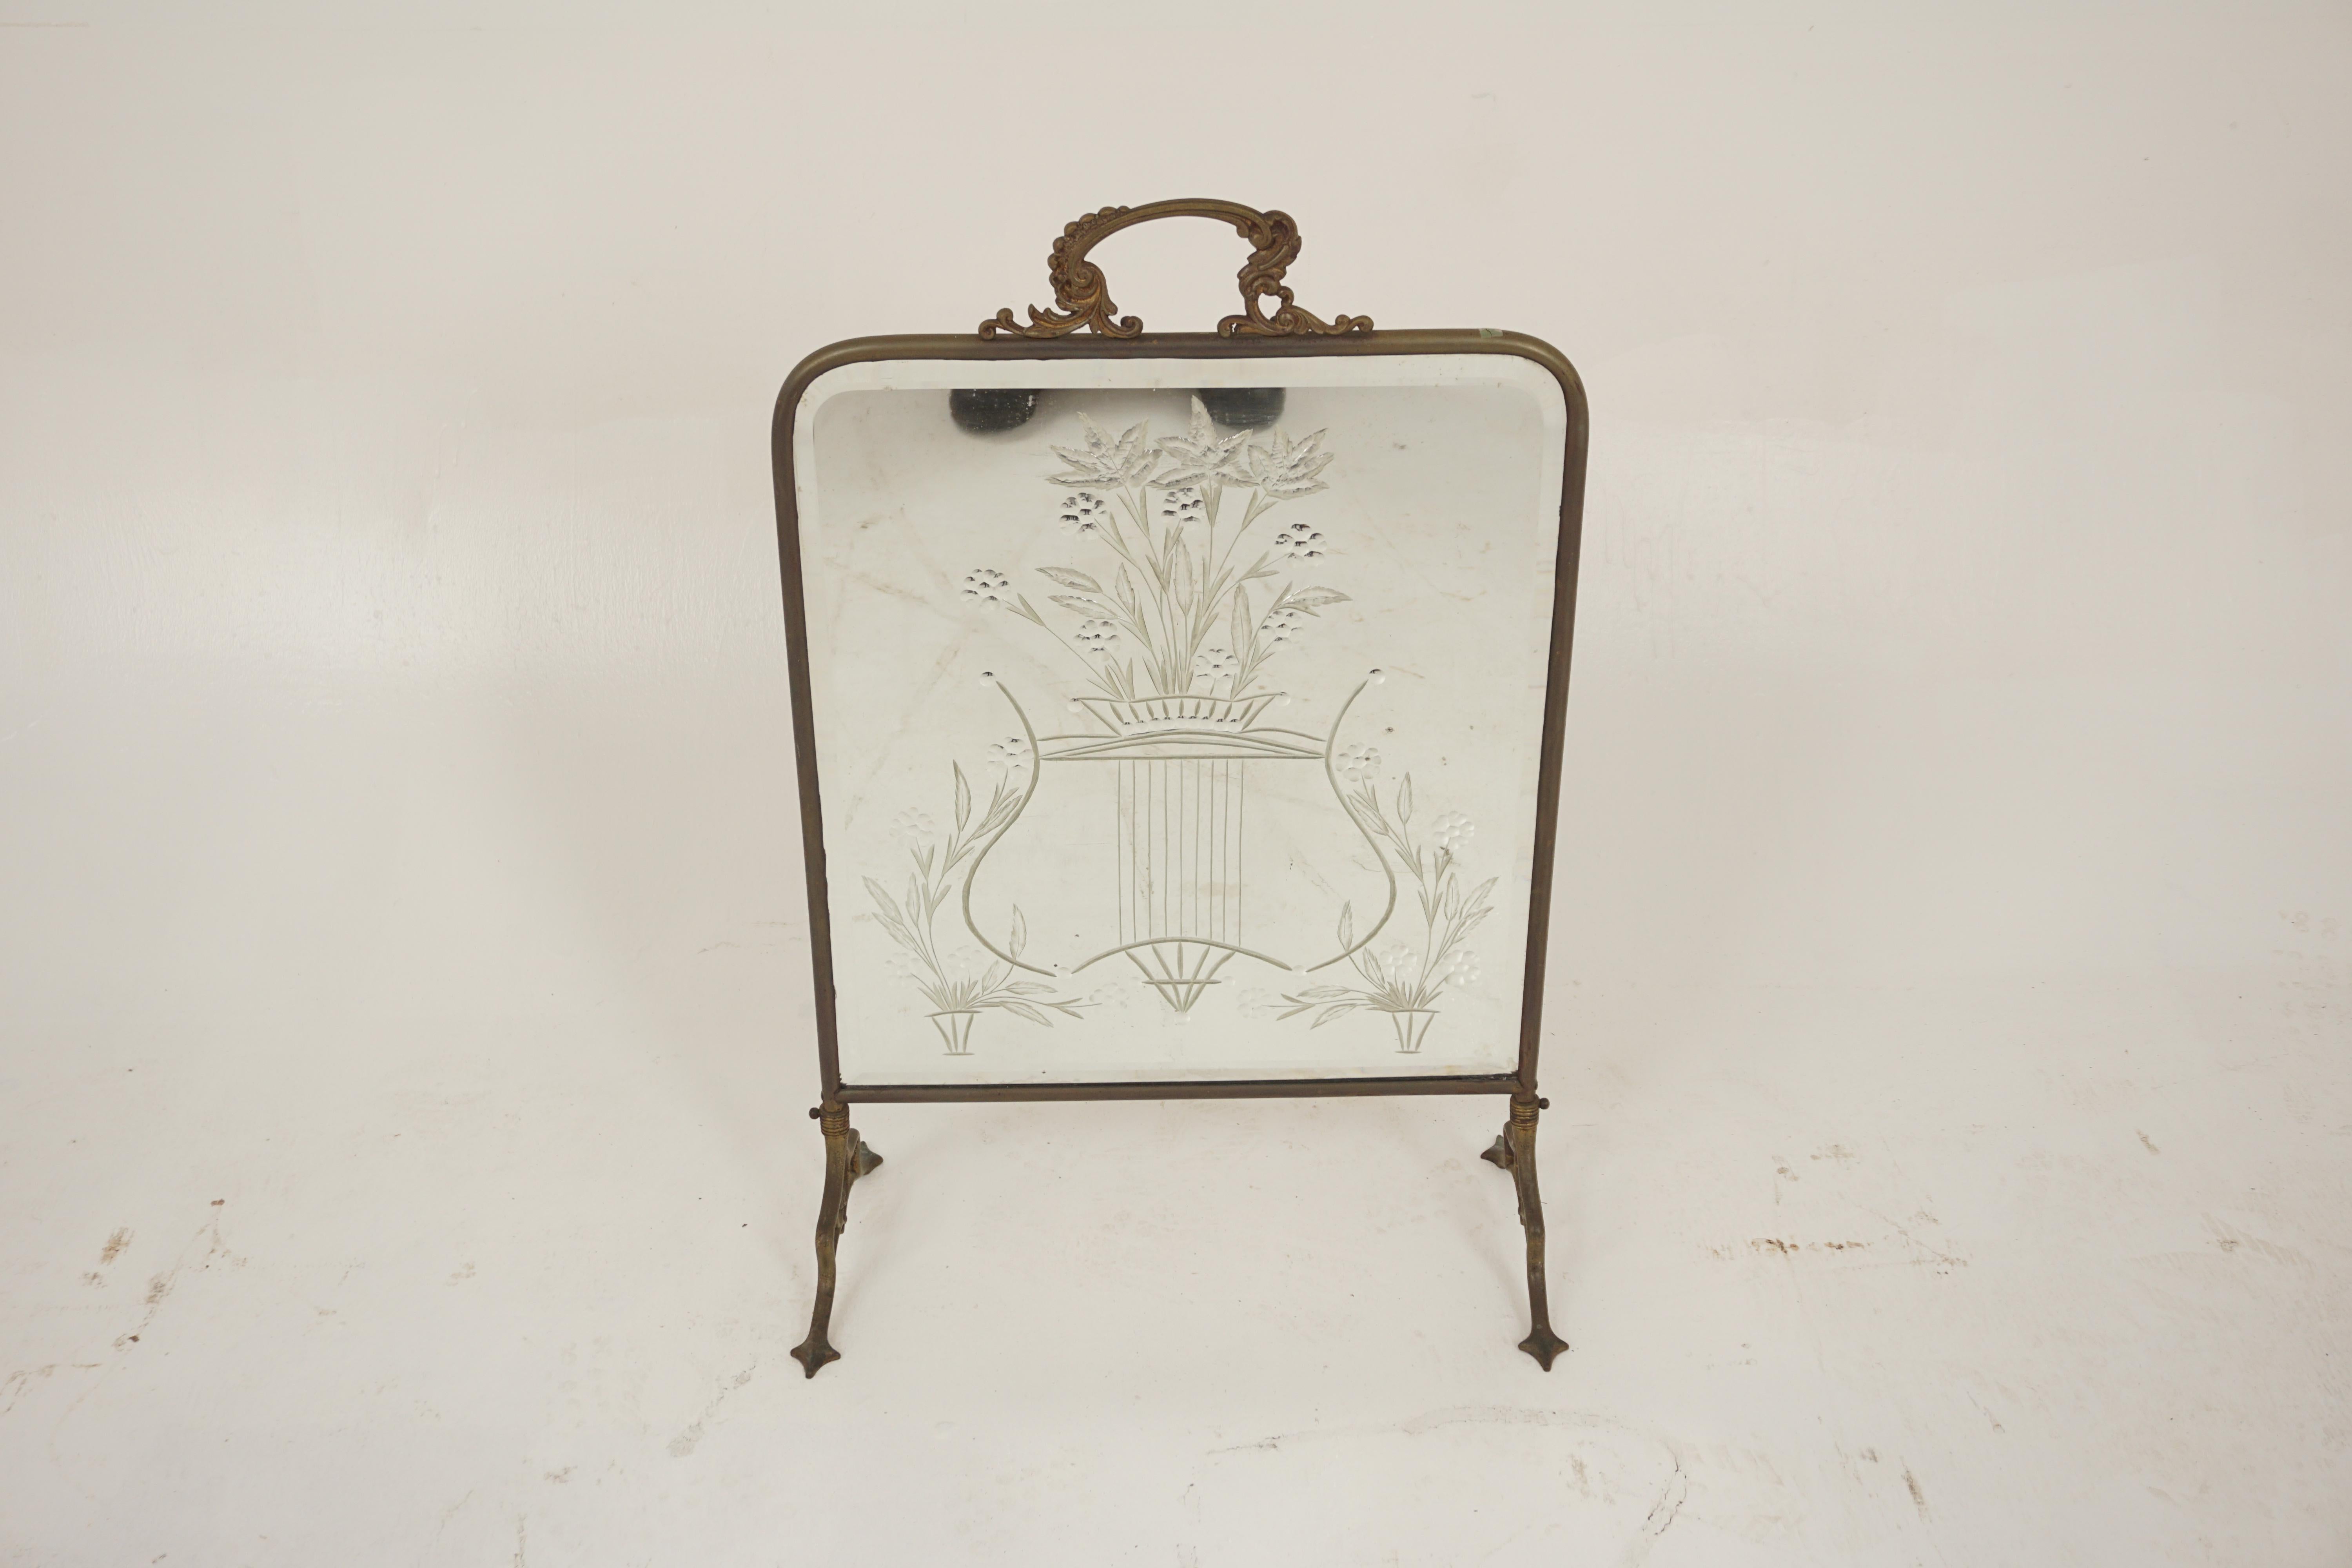 Ant. Victorian Mirrored and Brass Fire Screen, Scotland 1890, H947

Scotland 1890
Solid Brass
Bevelled Mirror
Nicely shaped brass handle on top
Original bevelled mirror with etch glass of flowers
Standing on four shaped legs
Some to the